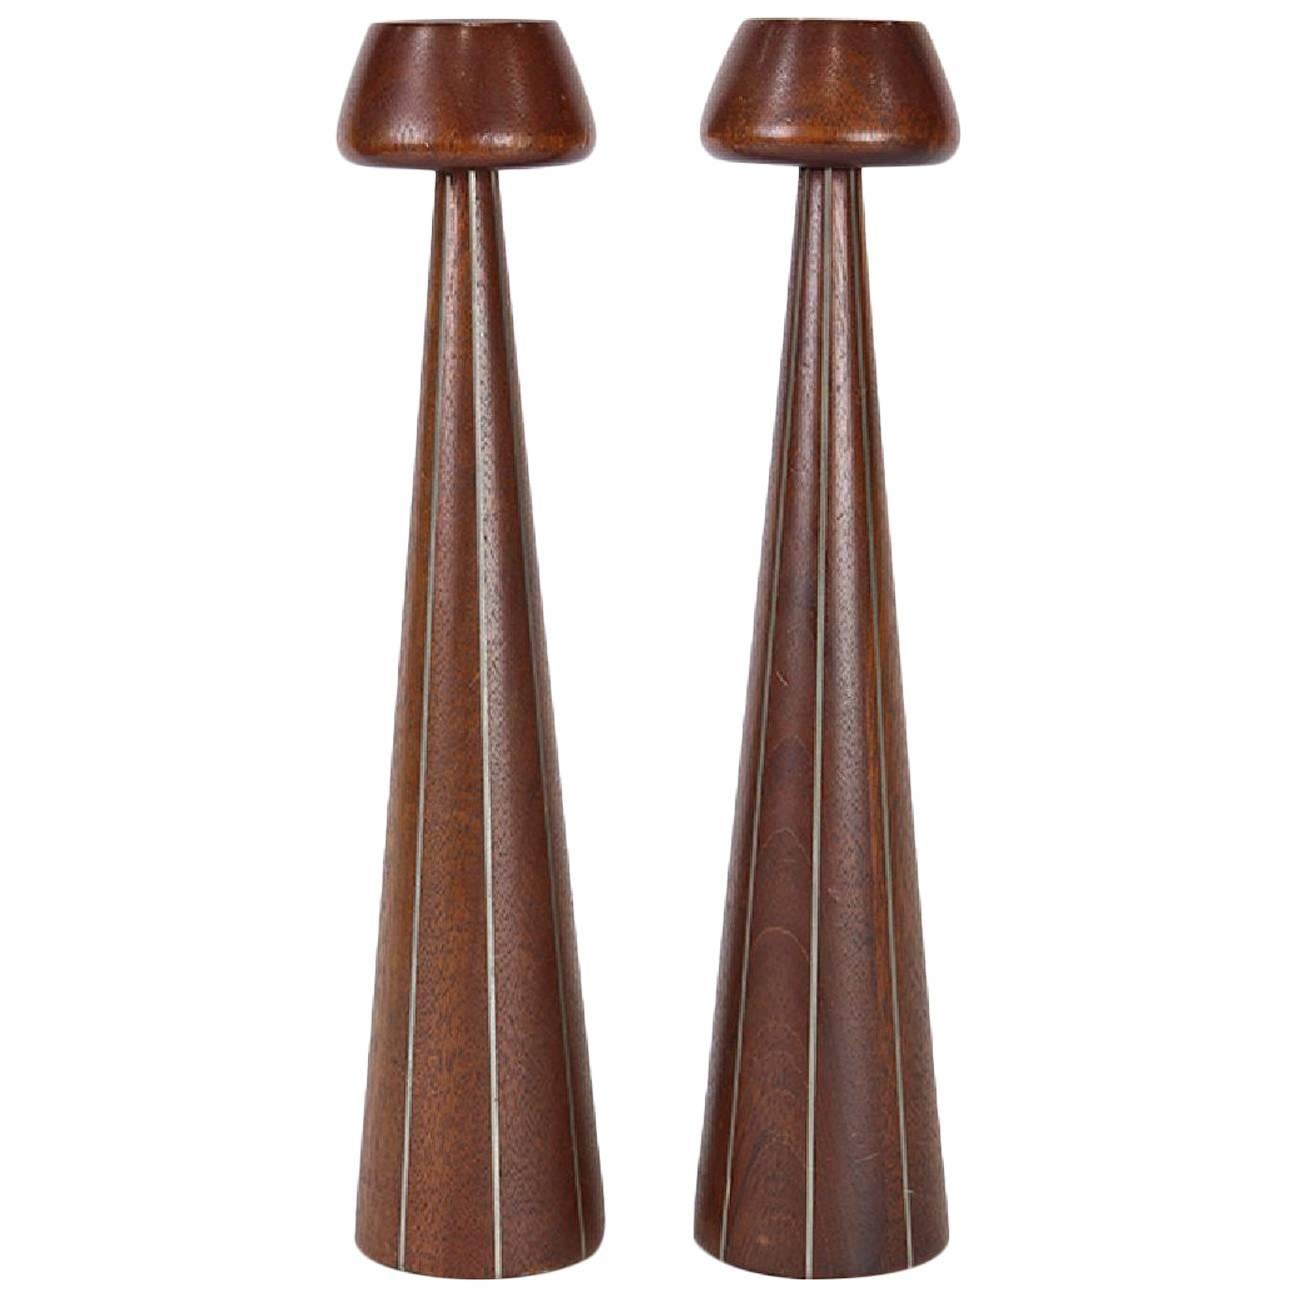 Pair of Early Candlesticks by Paul Evans and Phillip Powell